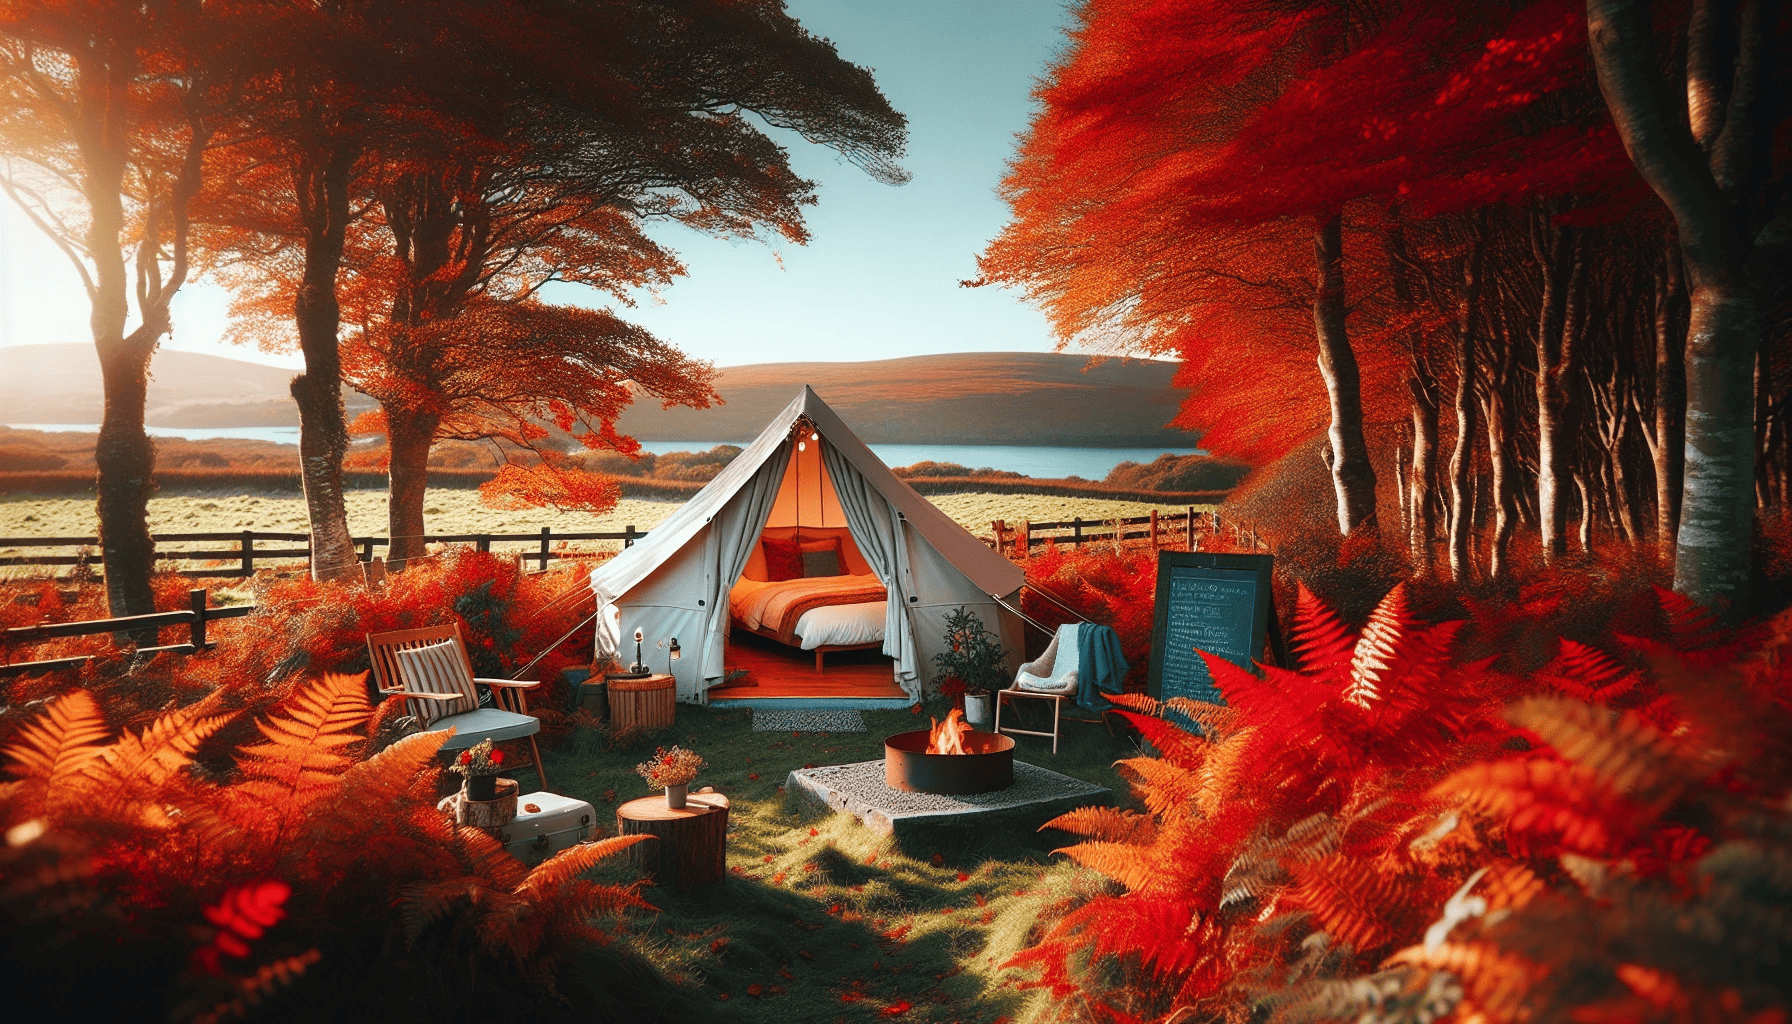 Autumn glamping getaway with stunning foliage in Northern Ireland